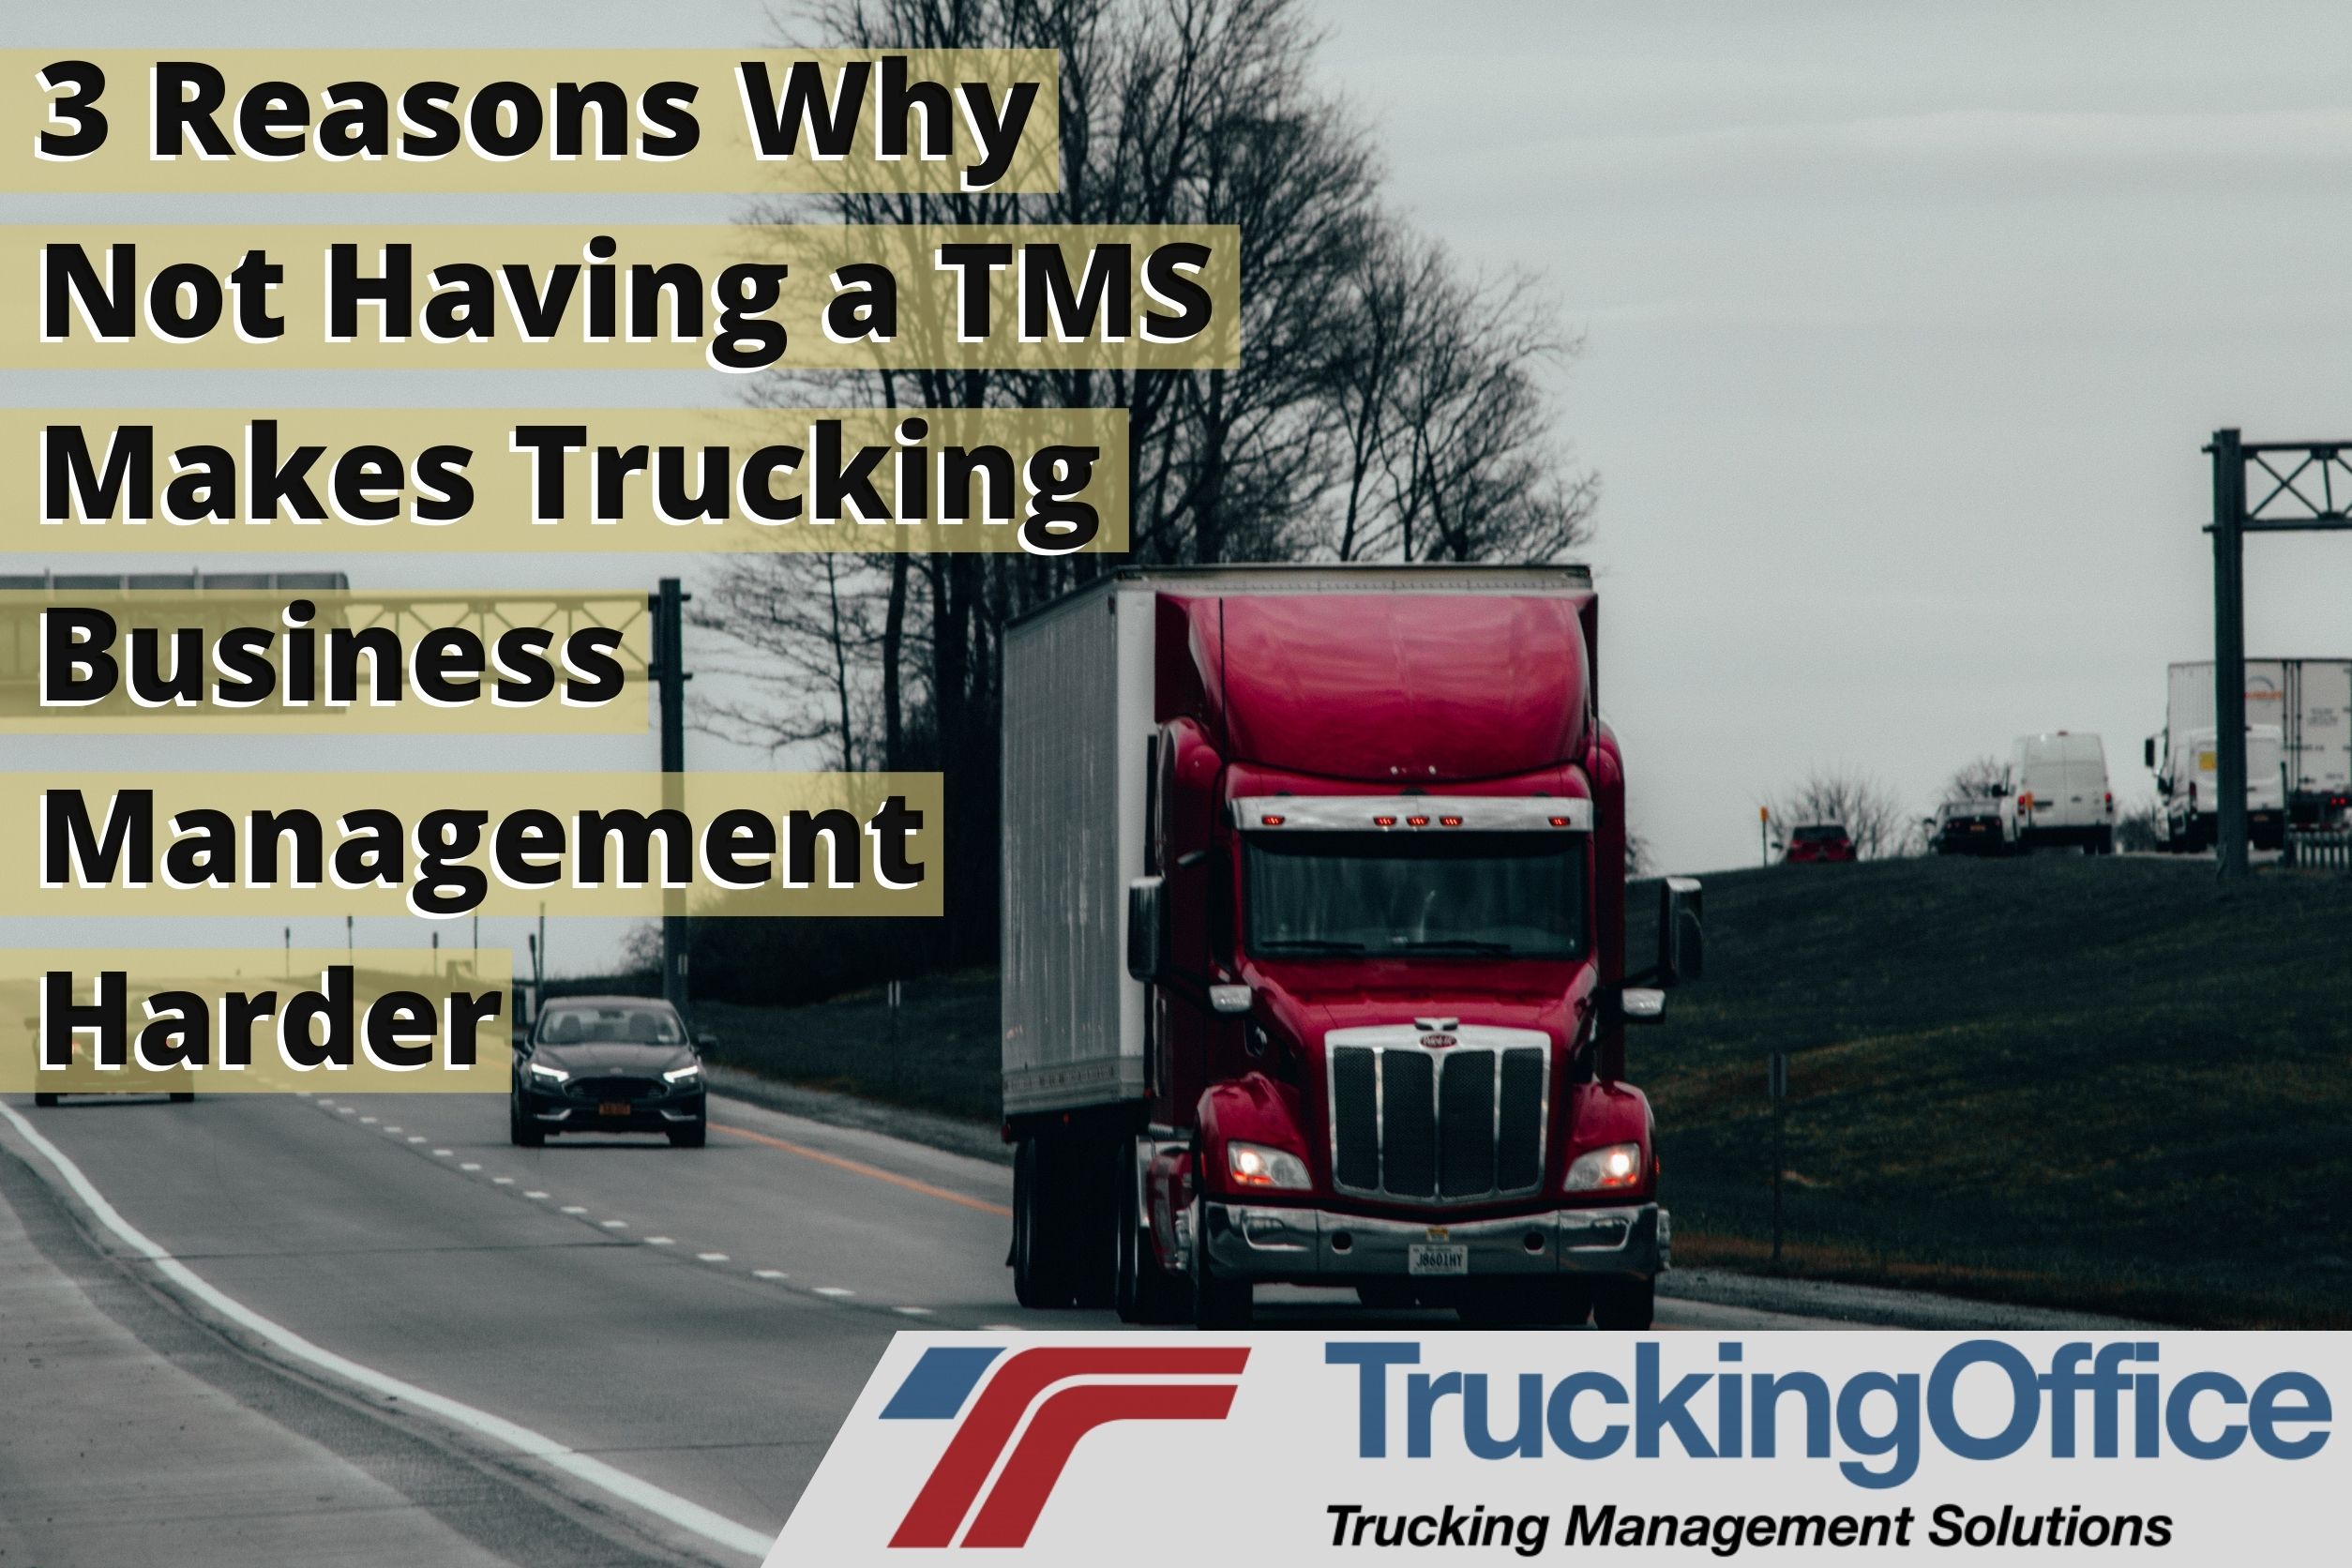 3 Reasons Why Not Having a TMS Makes Trucking Business Management Harder